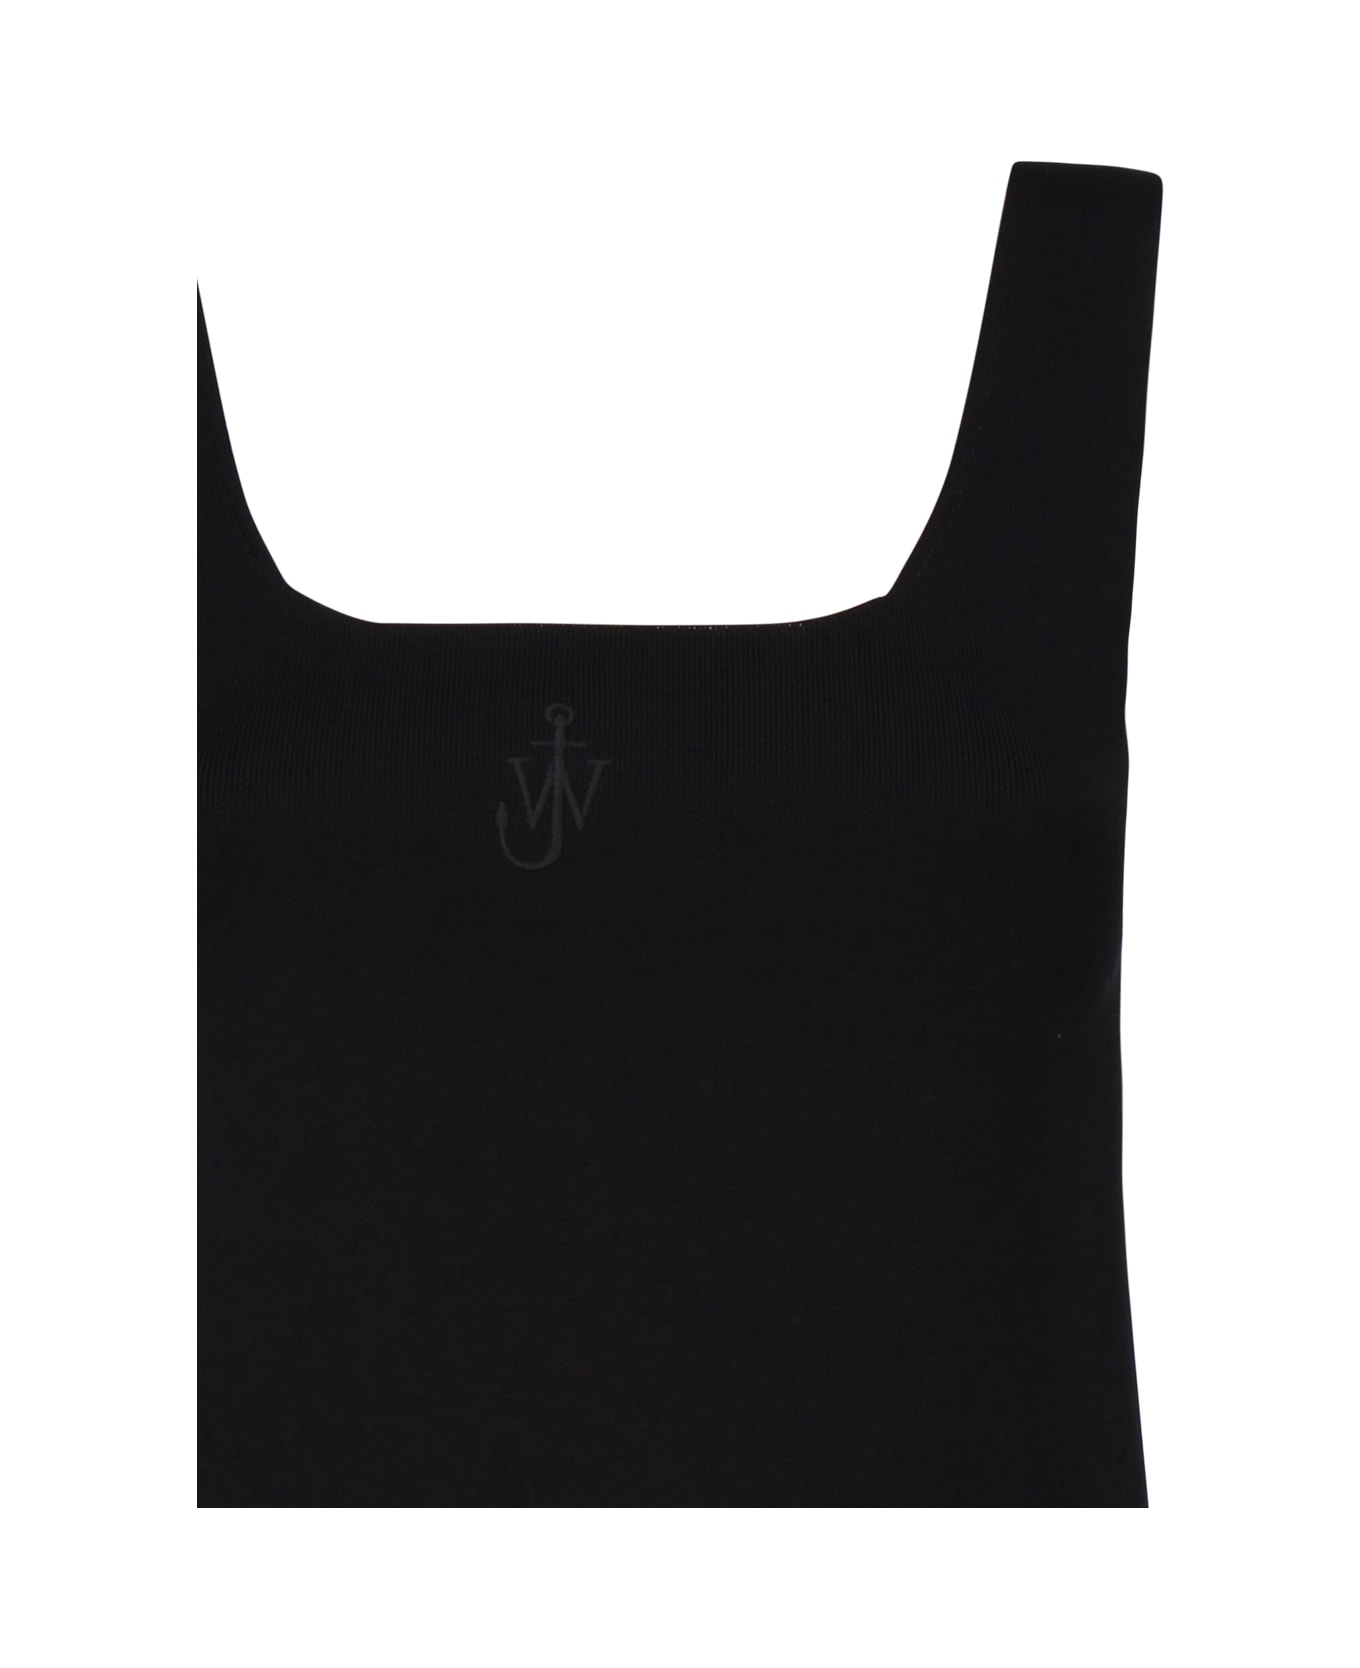 J.W. Anderson Tank Top With Anchor Embroidery - Black